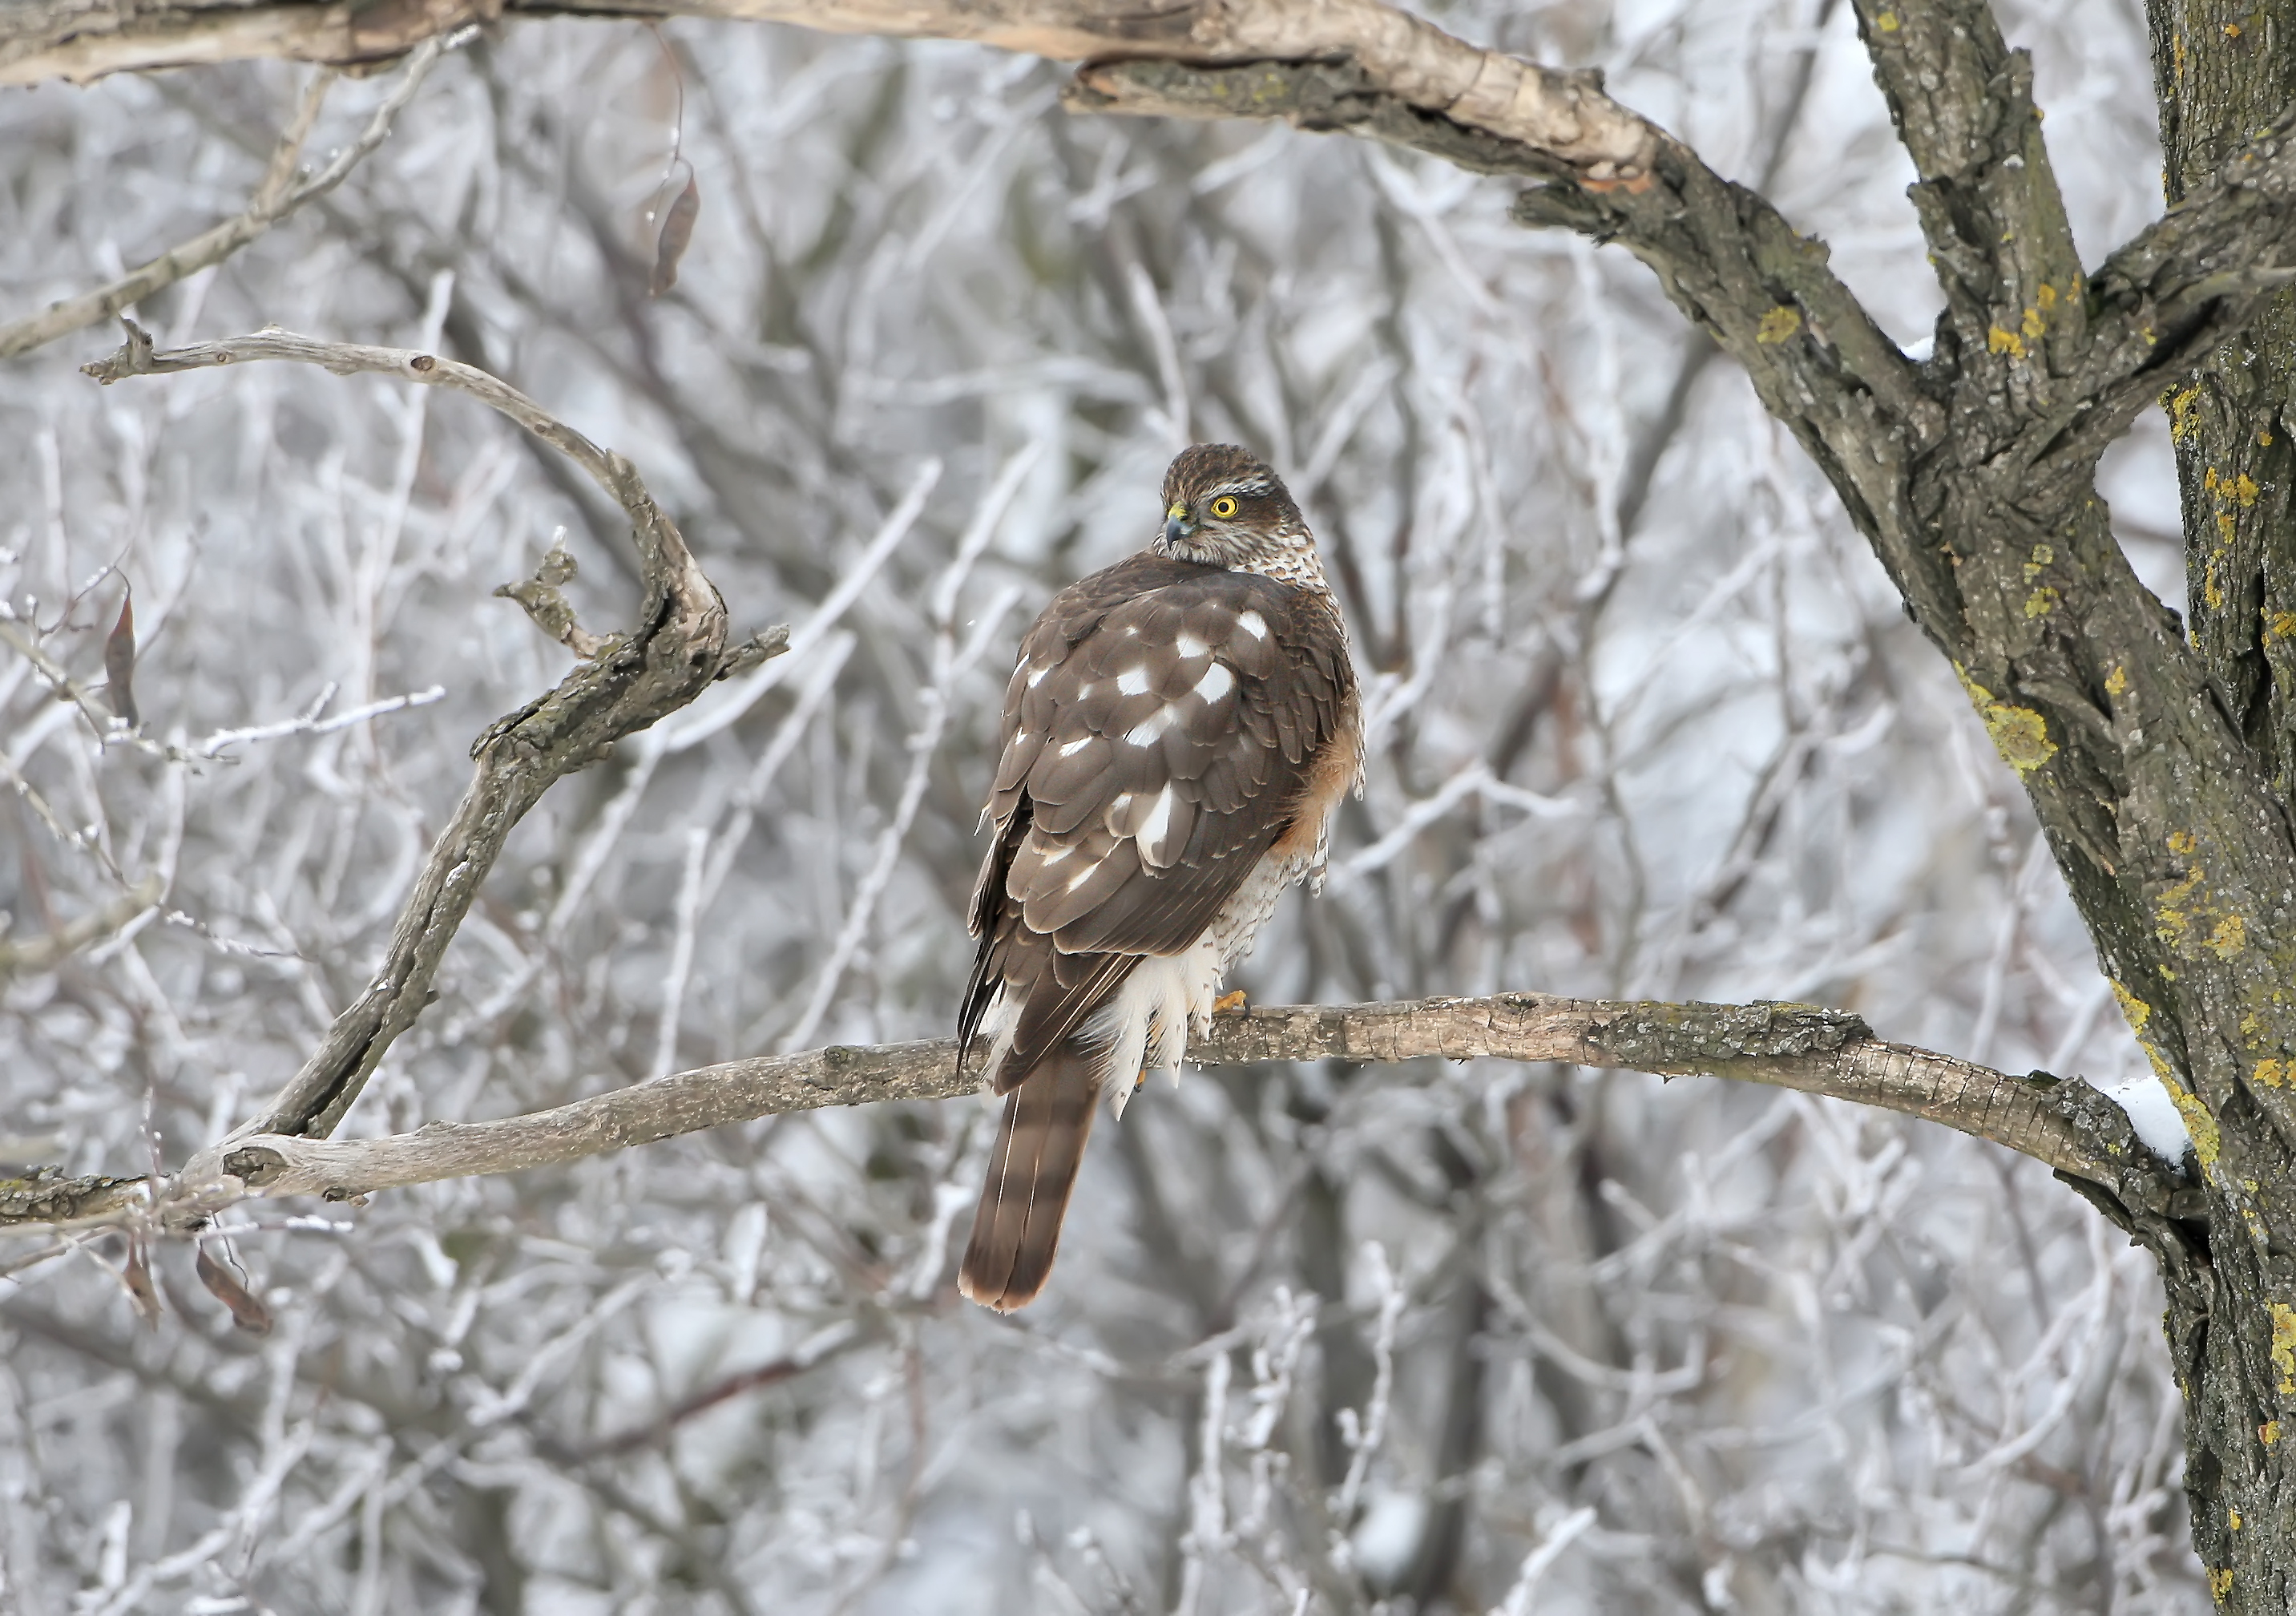 A Sparrowhawk sits on the branch in a winter forest